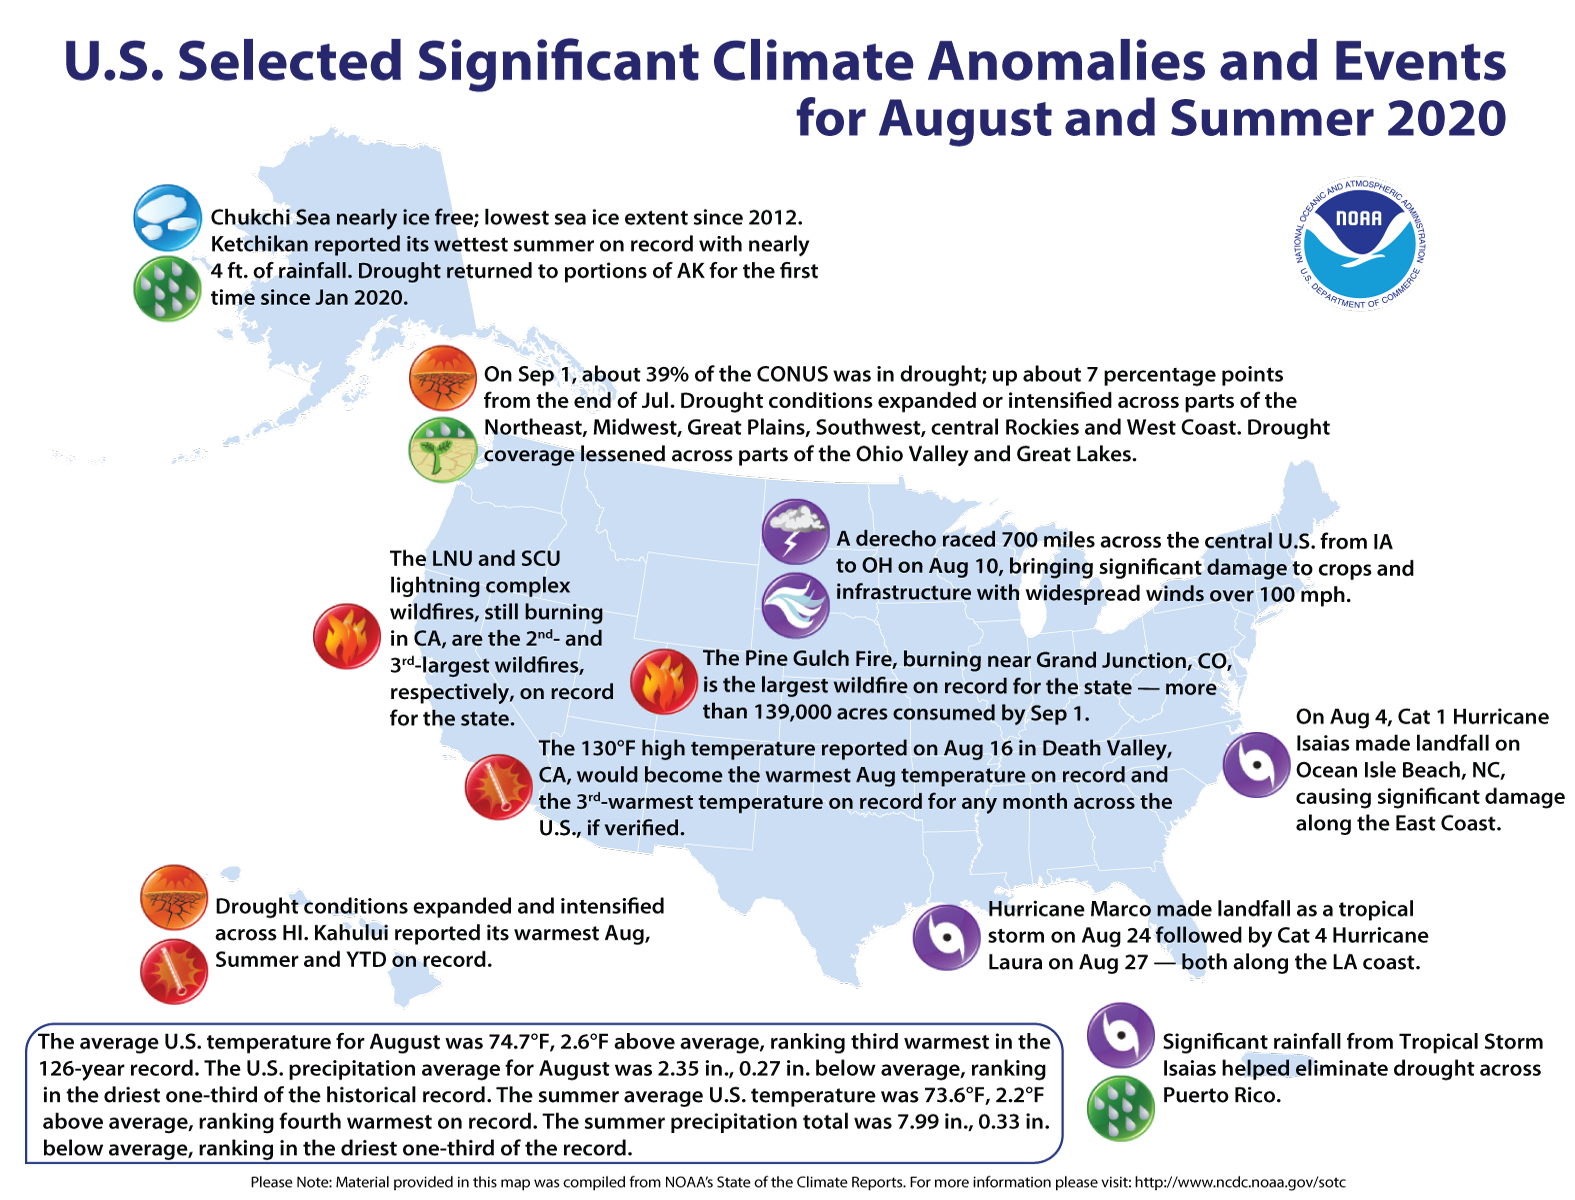 Summer 2020 ranked as one of the hottest on record for U.S.